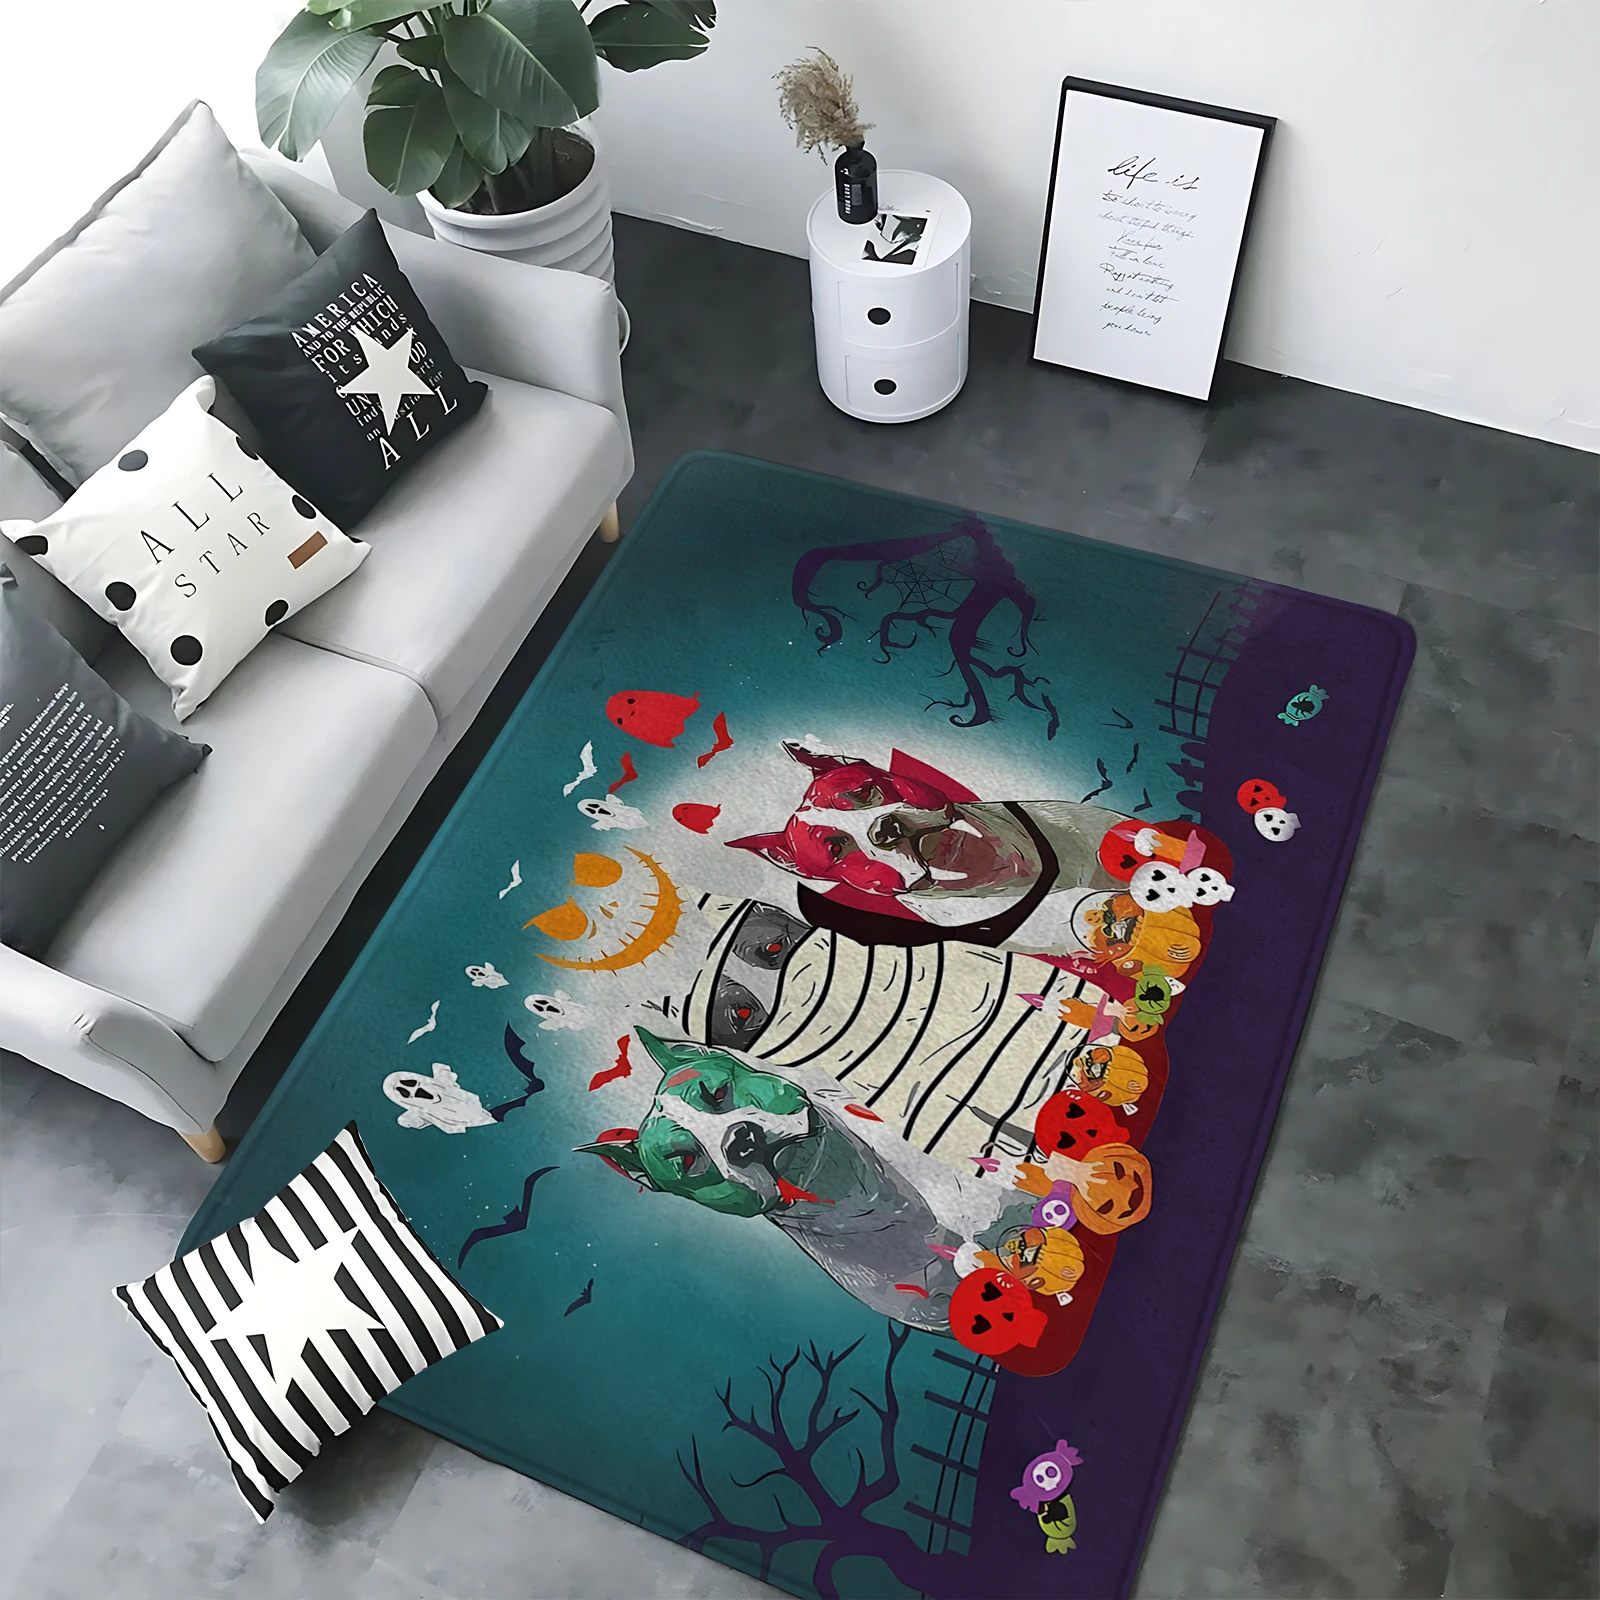 

HX Funny Halloween Carpets Amstaff 3D Printed Floor Mats for Living Room Area Rugs Festival Decoration Gifts Dropshipping